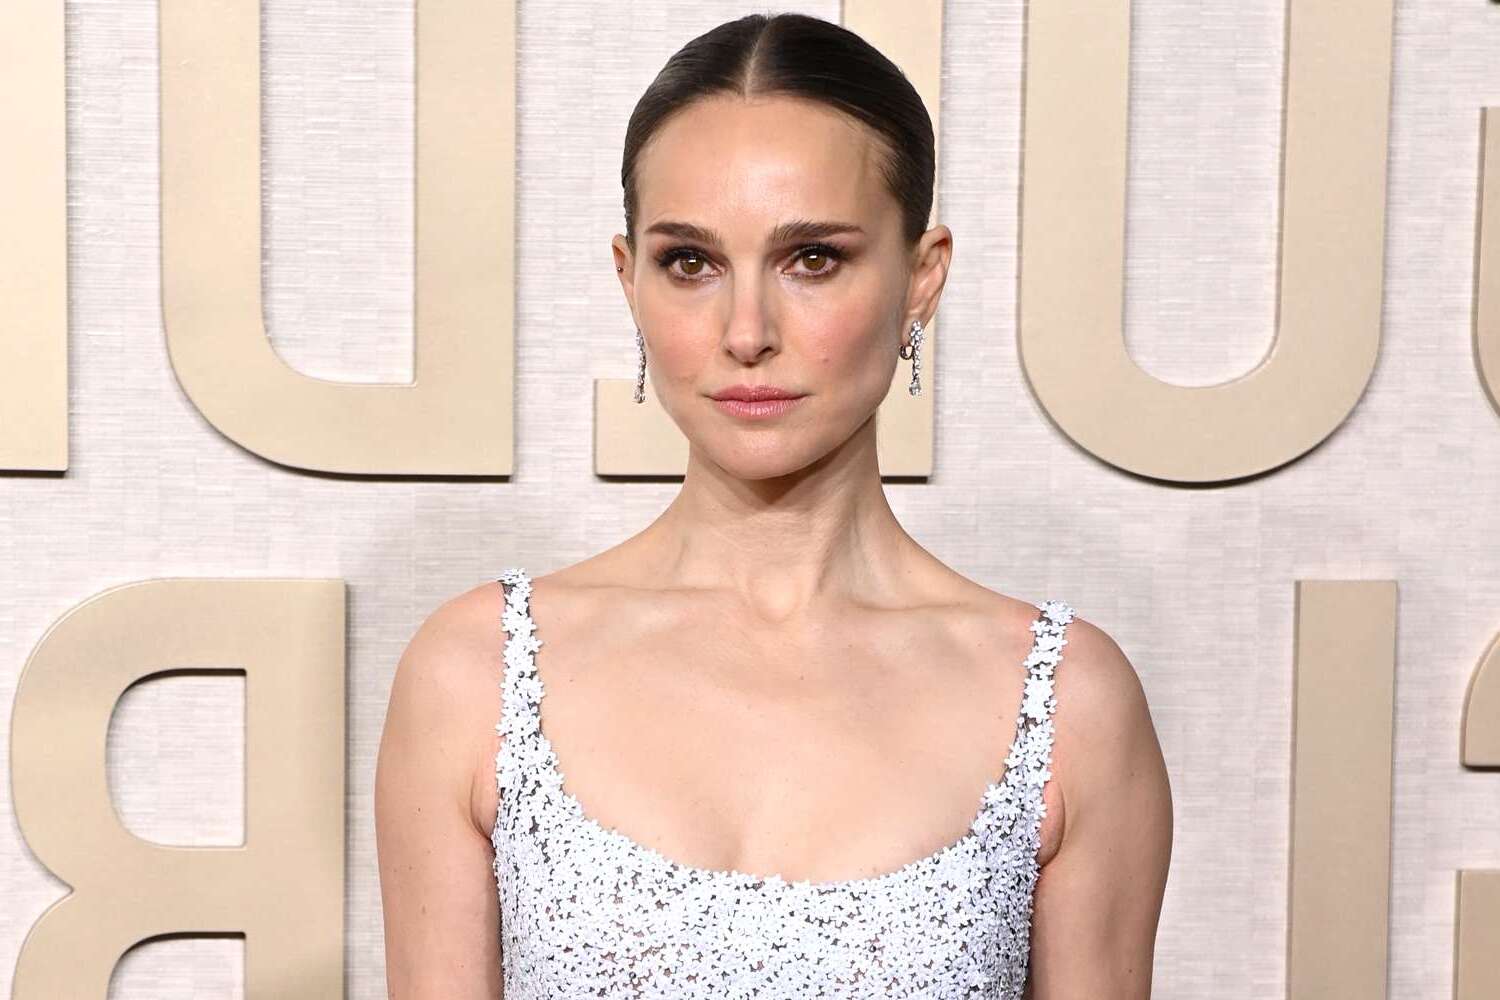 Natalie Portman Voices Concern Over Kids’ Knowledge Of YouTubers Over Movie Stars